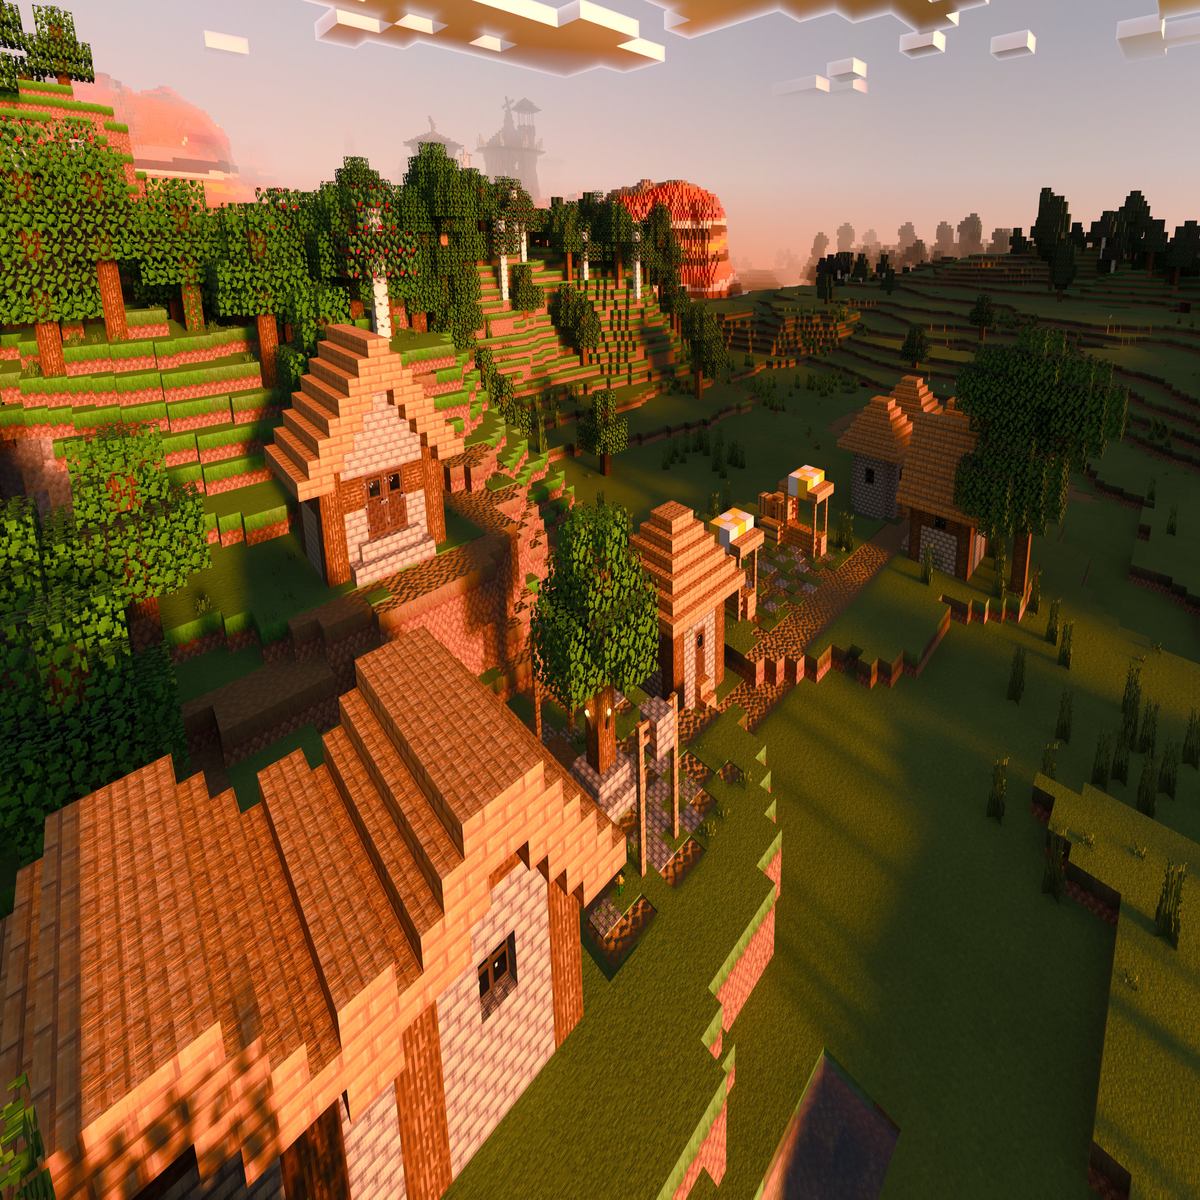 Minecraft With Ray Tracing Now Available for All Windows 10 Players